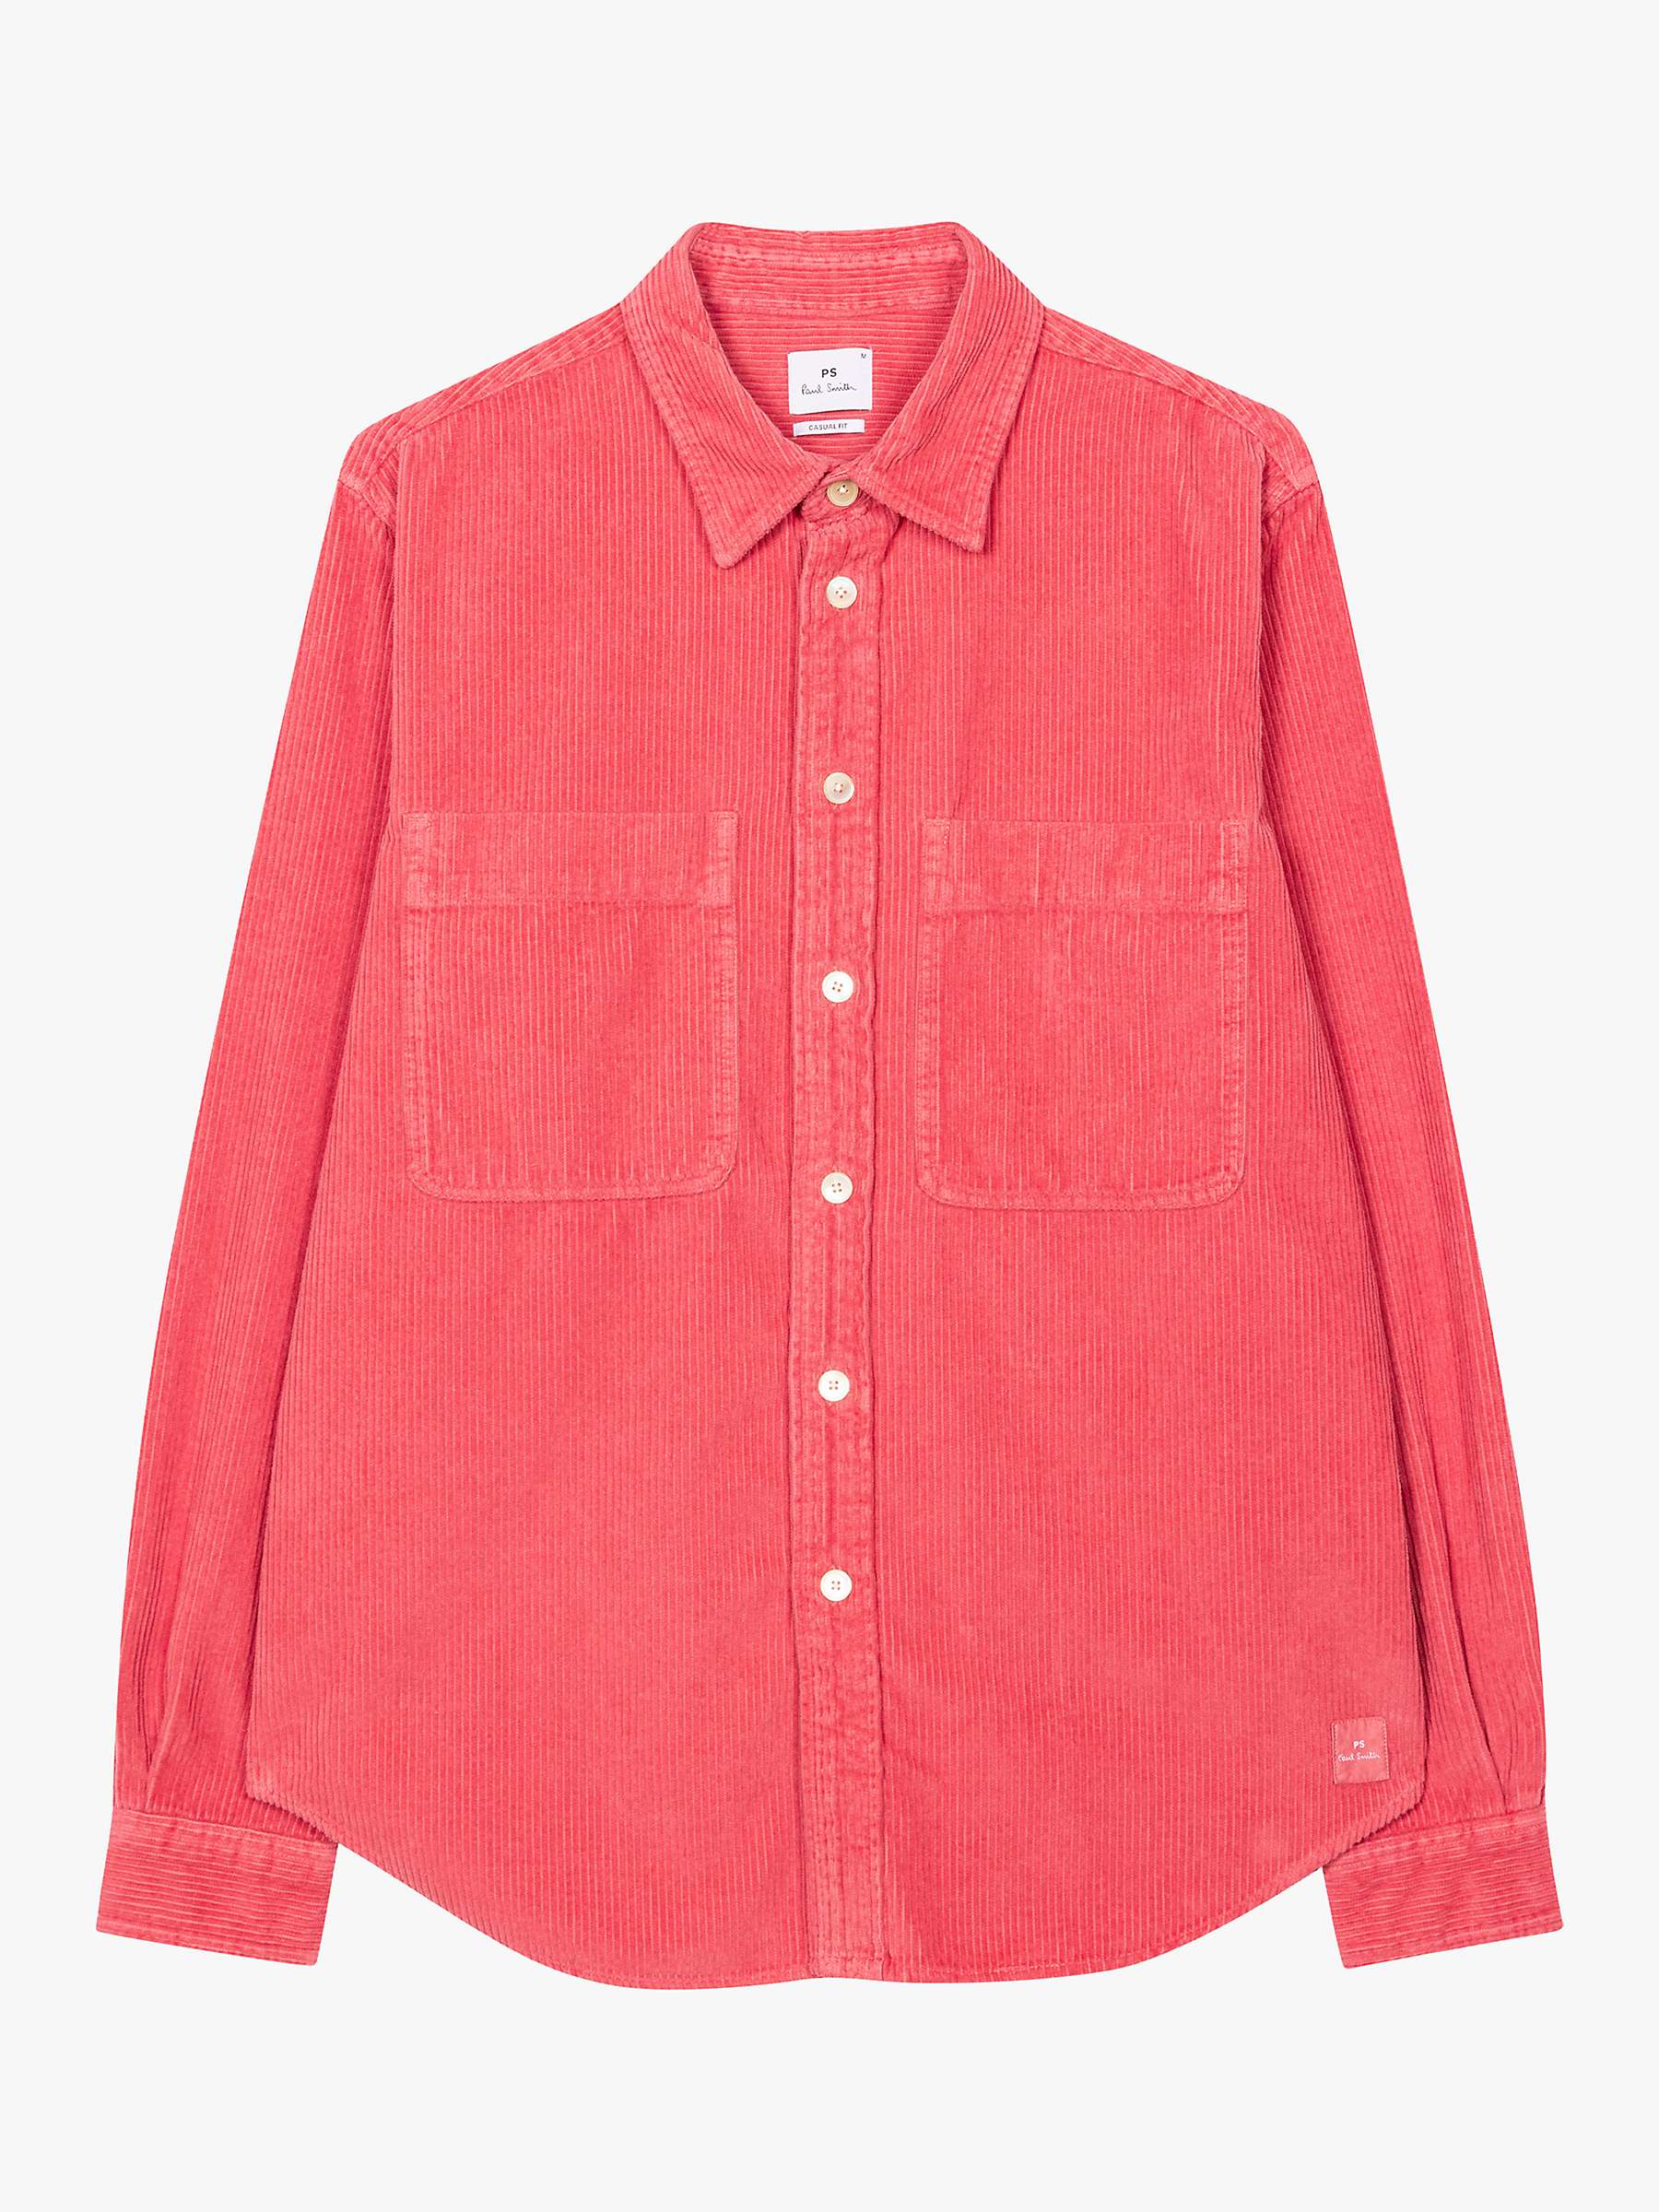 Buy Paul Smith Casual Fit Cord Shirt, Raspberry Online at johnlewis.com